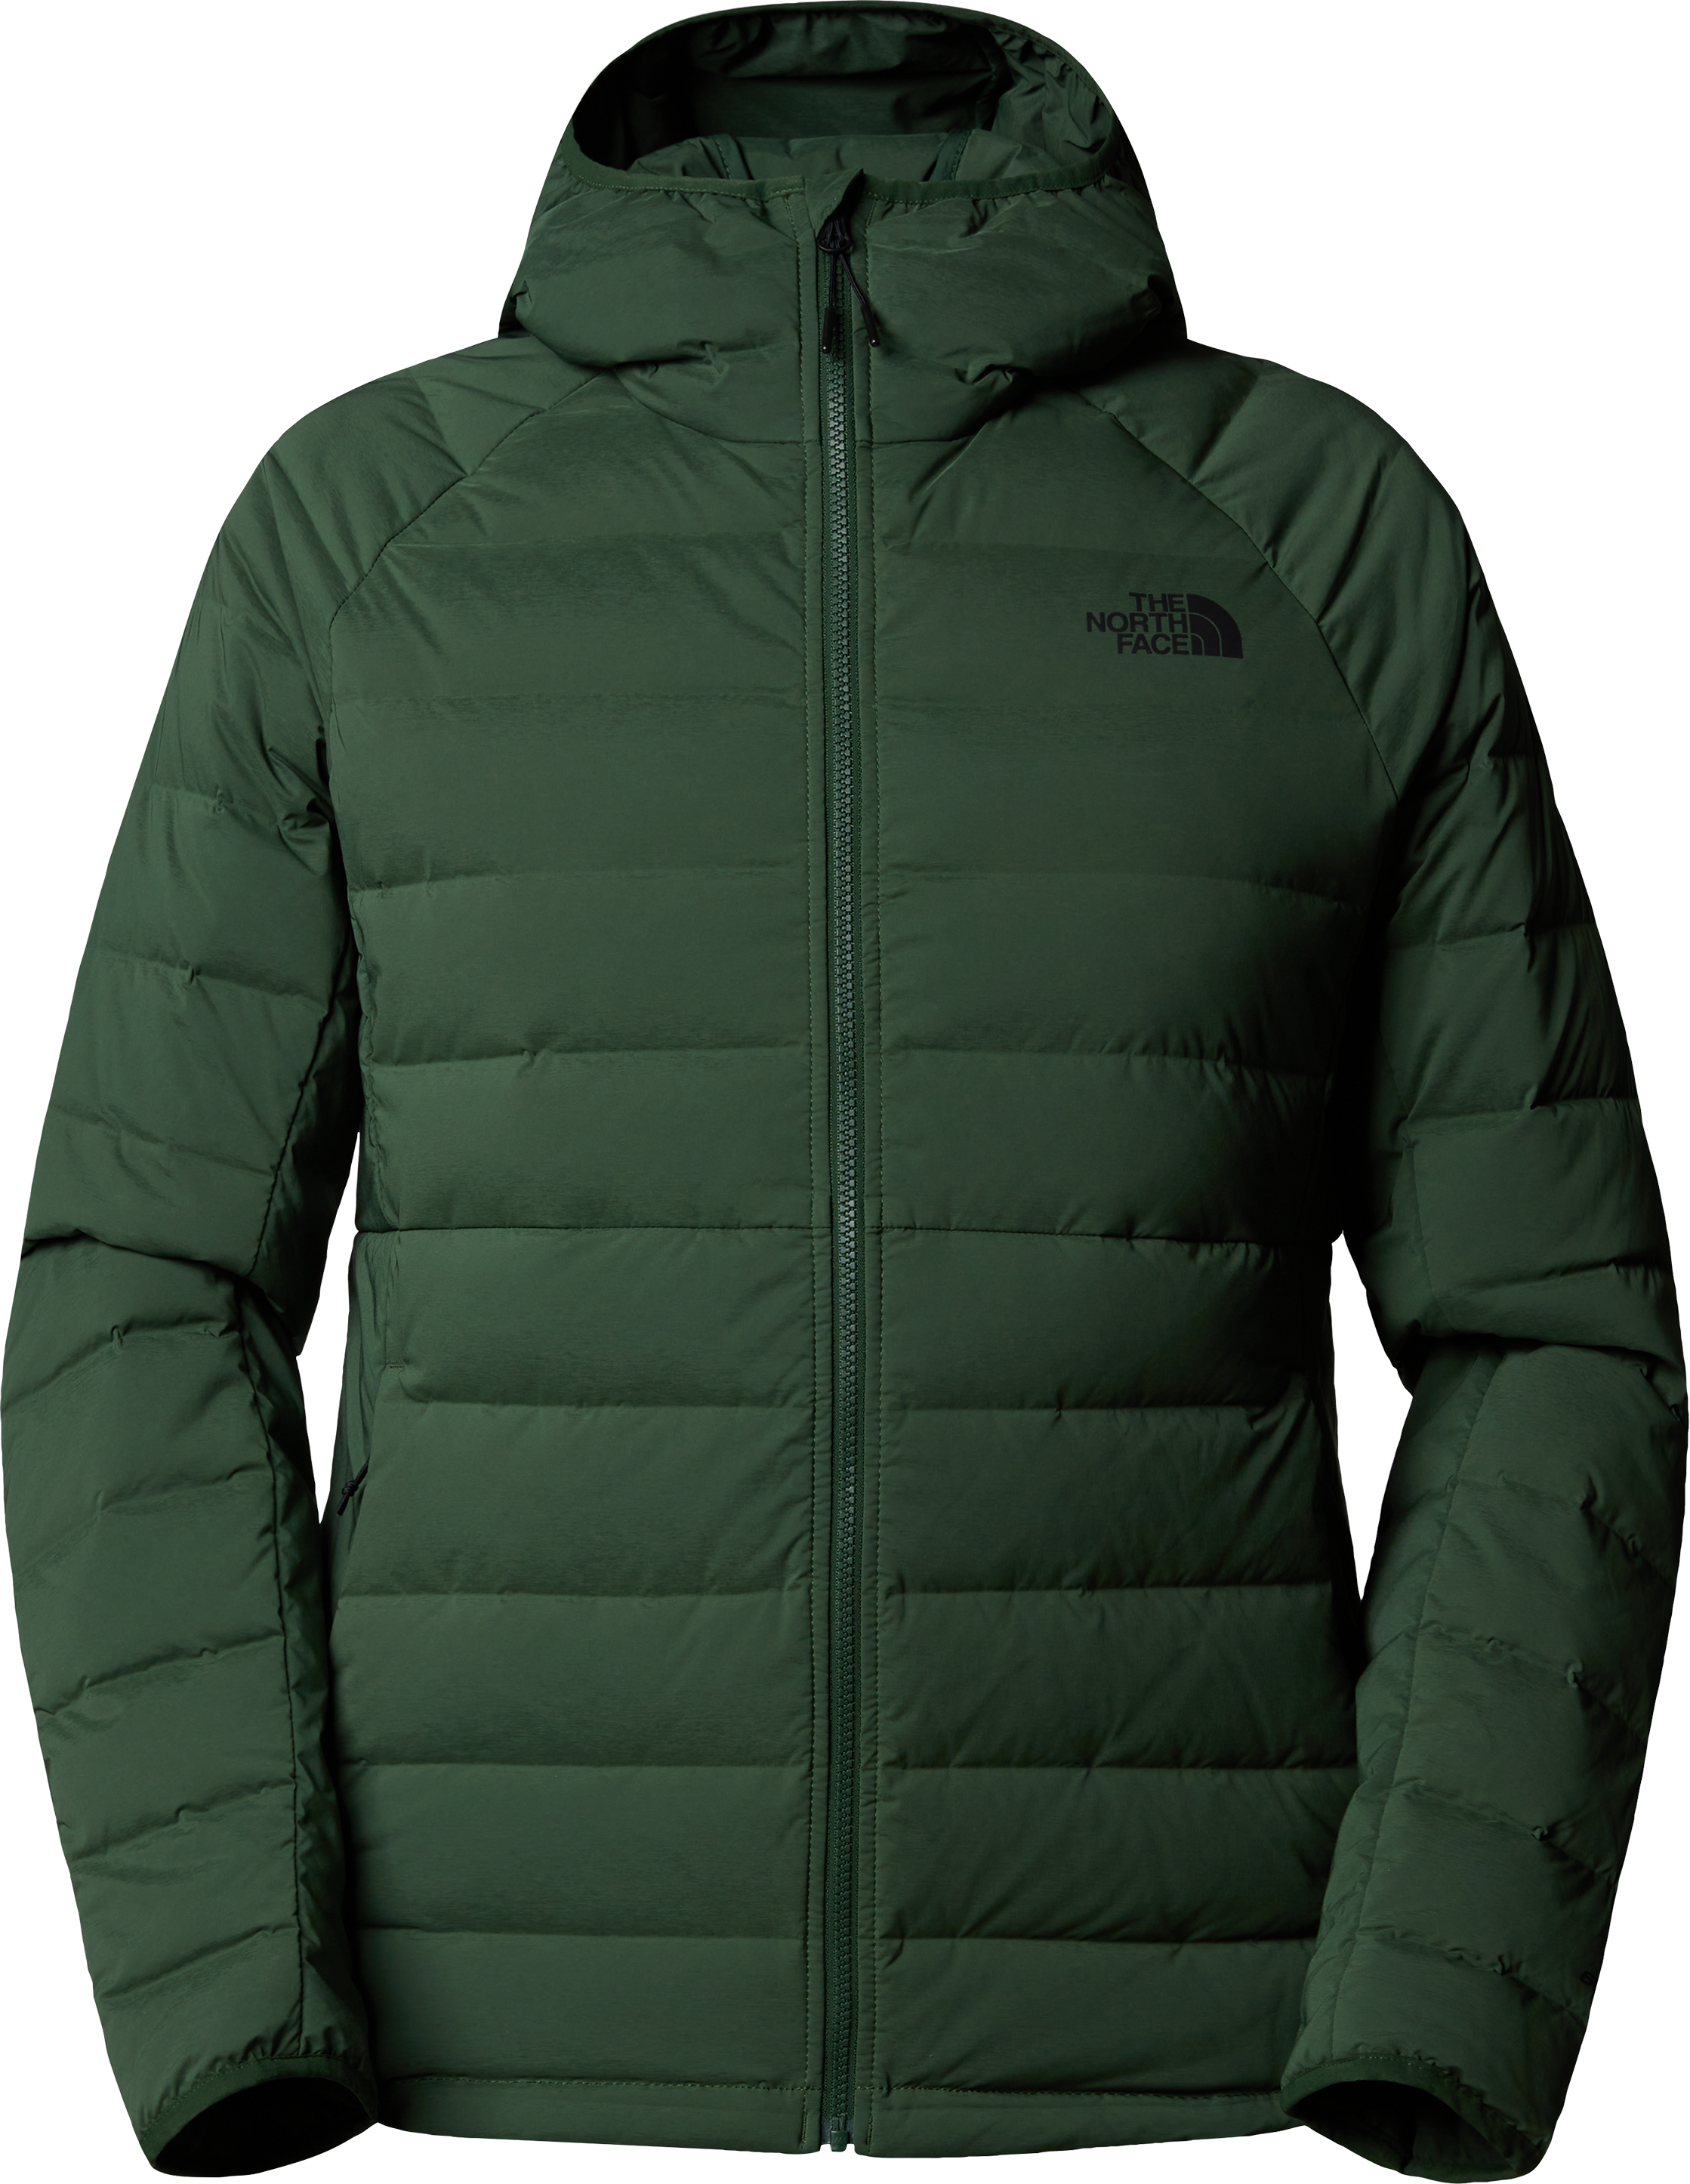 The North Face The North Face Men's Belleview Stretch Down Jacket Pine Needle S, PINE NEEDLE